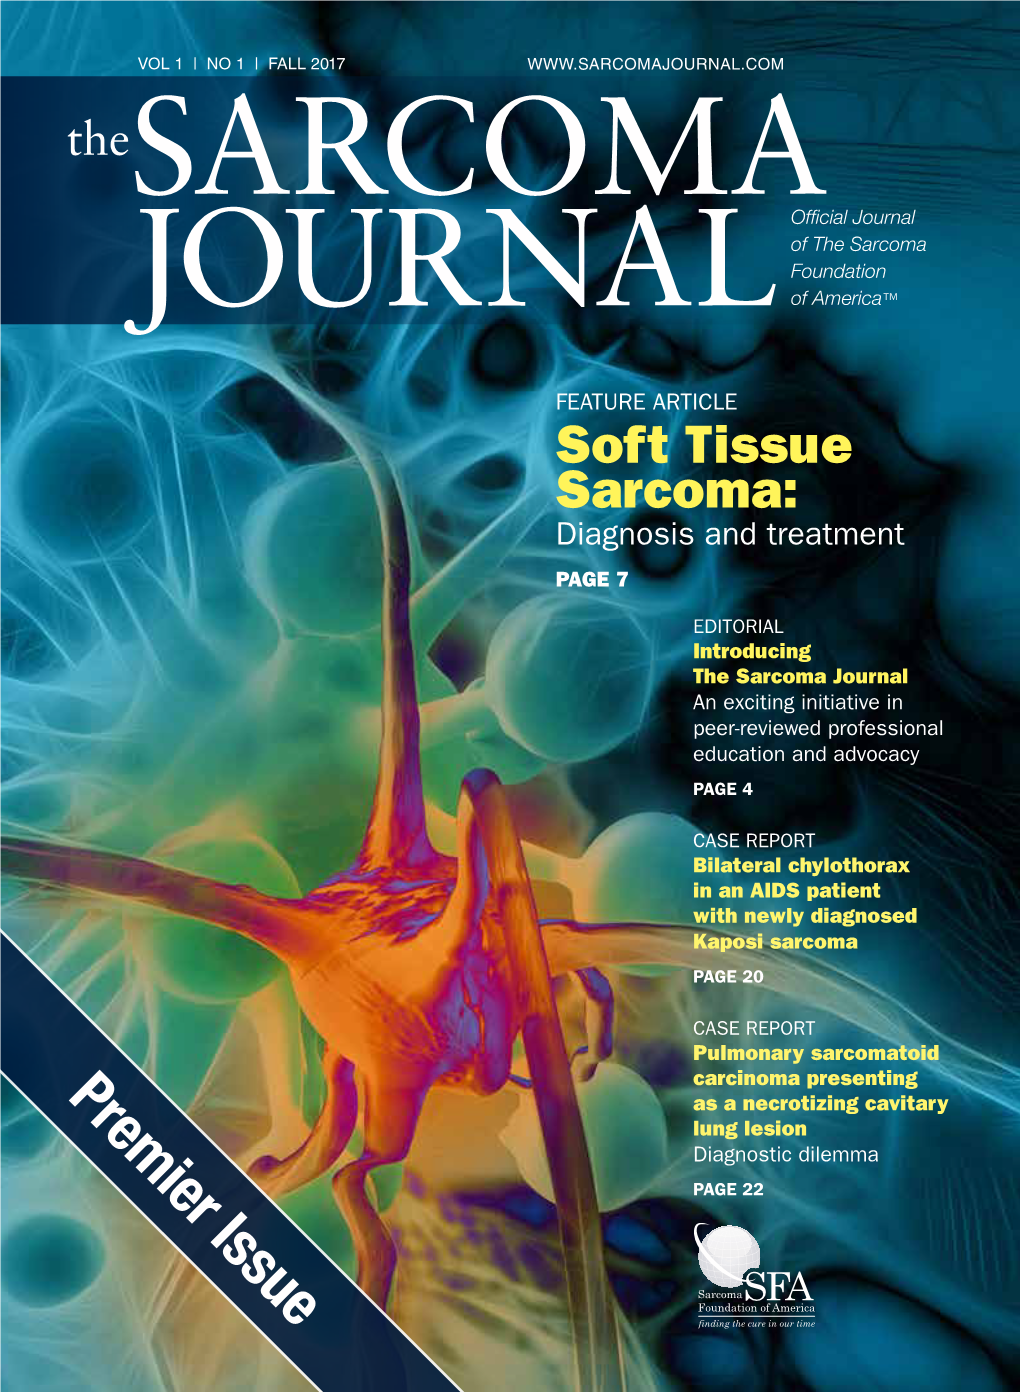 Sarcoma Journal an Exciting Initiative in Peer-Reviewed Professional Education and Advocacy PAGE 4